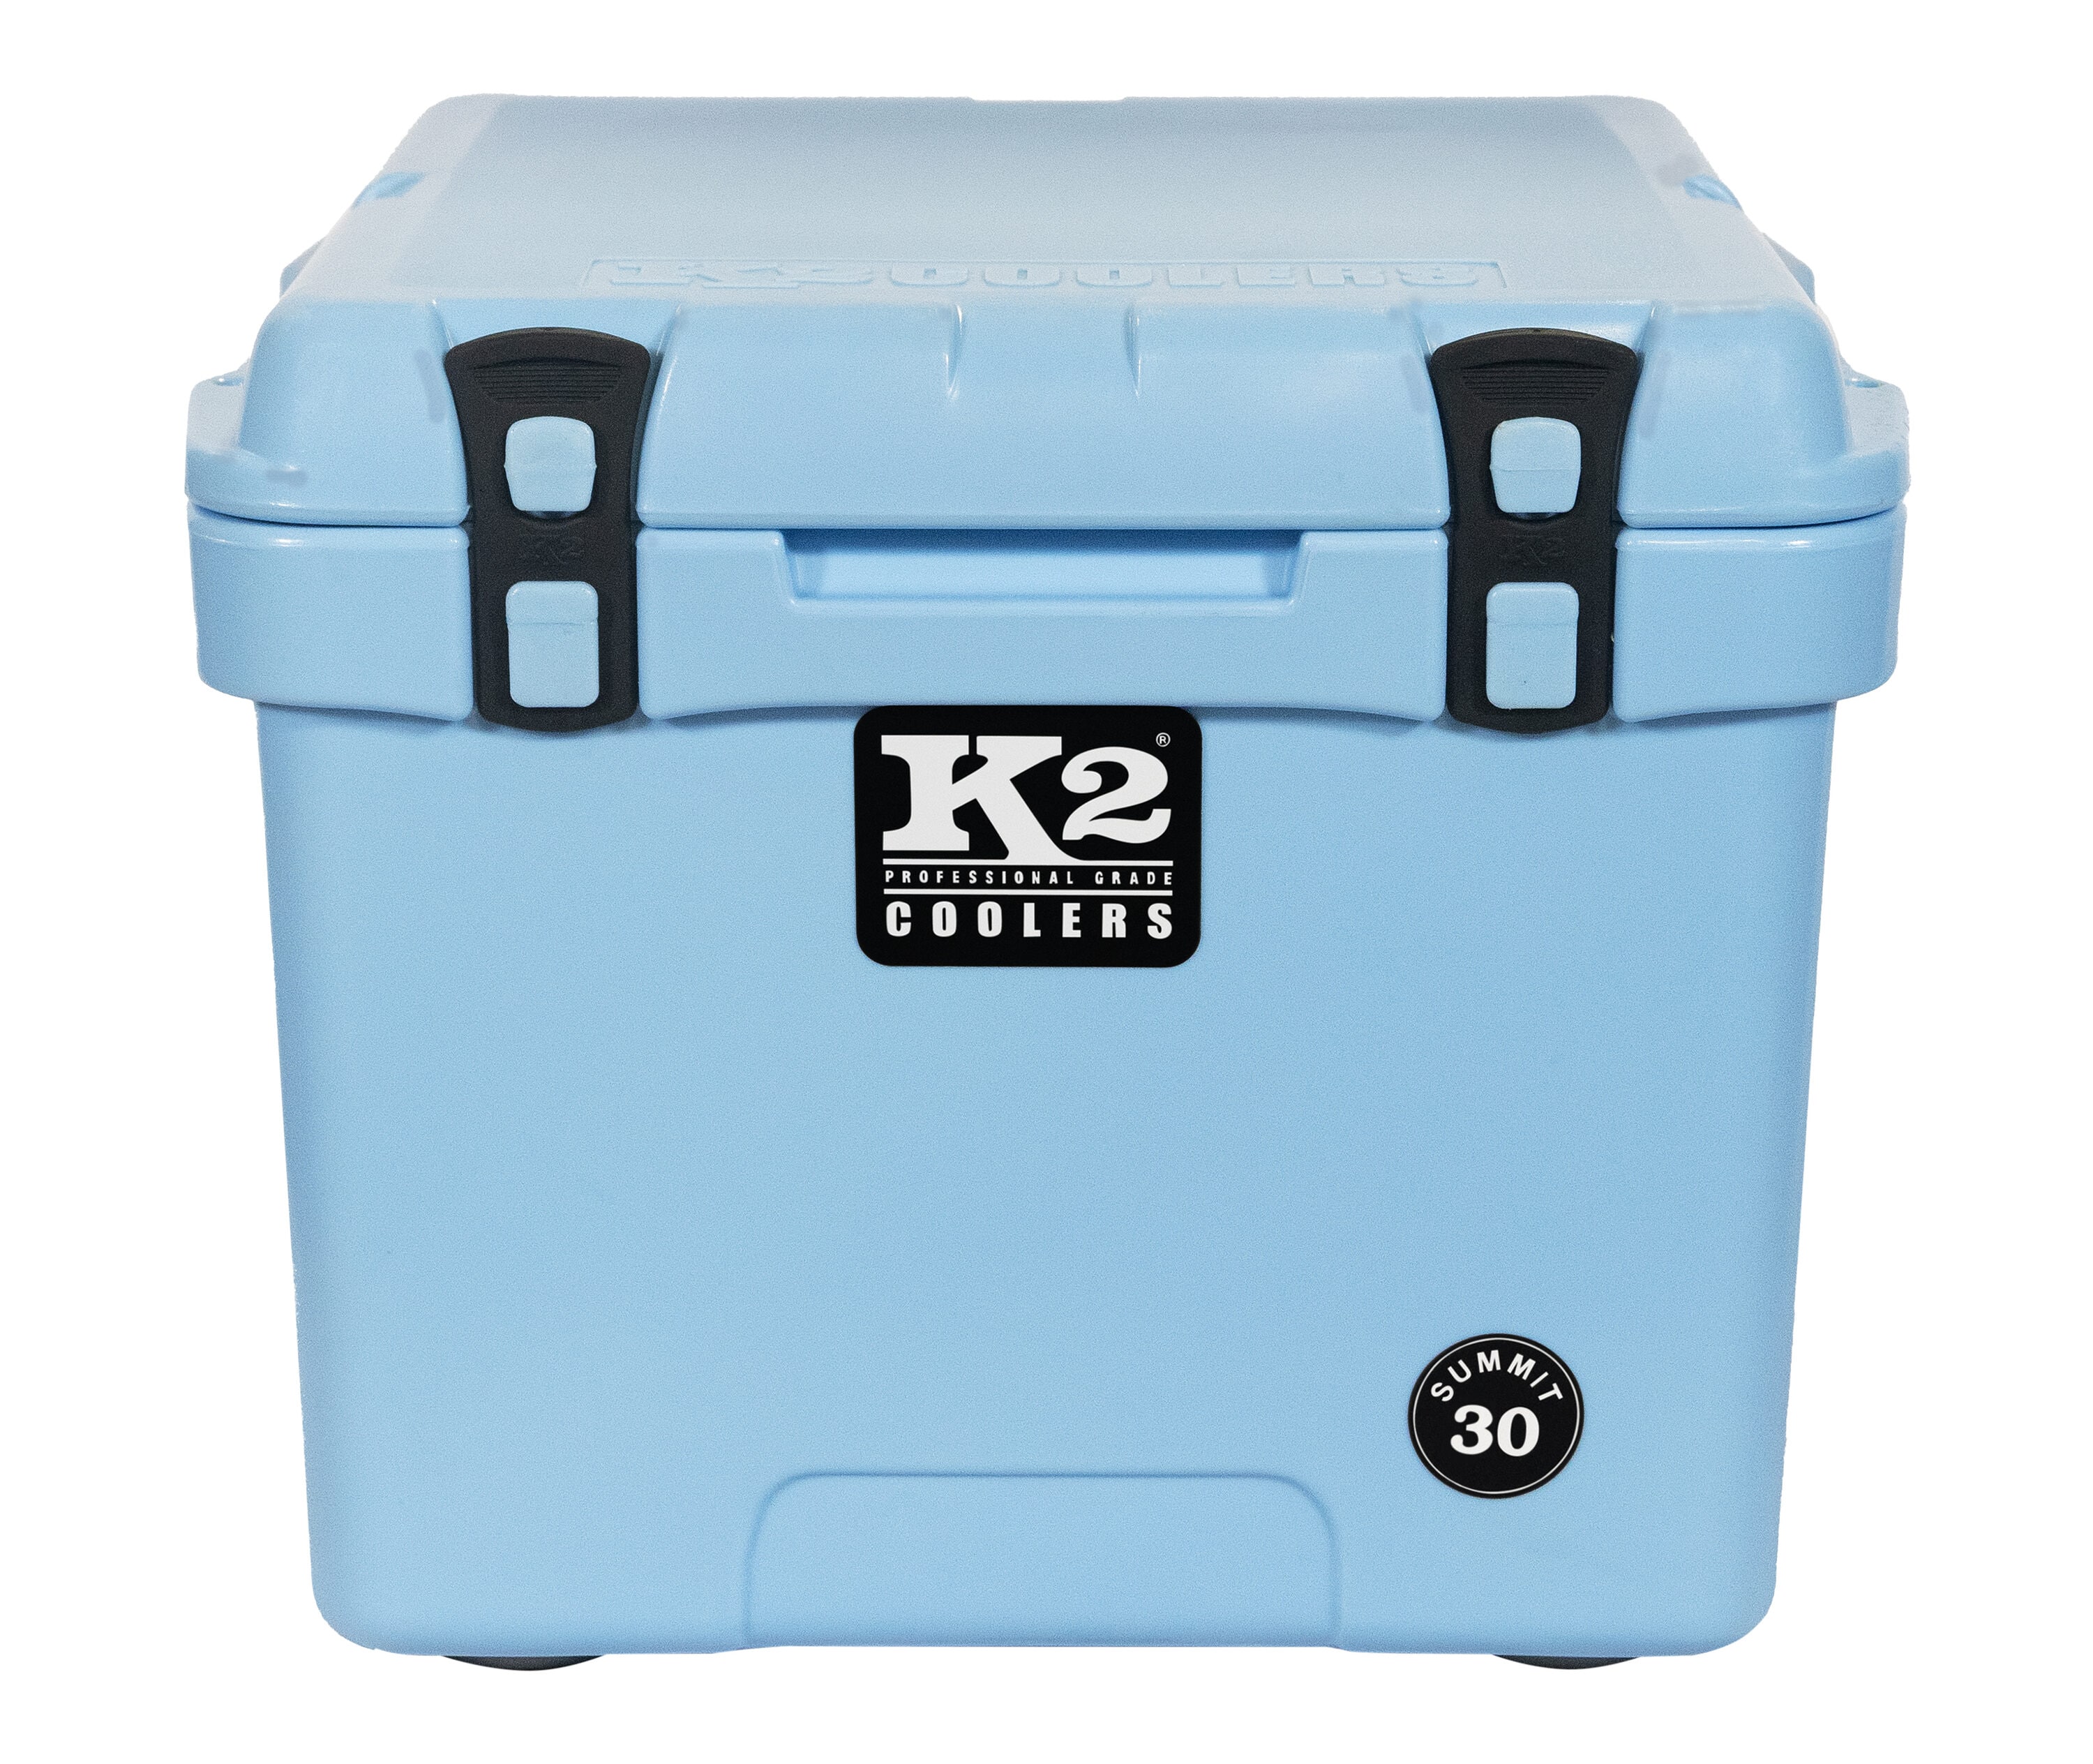 K2 Coolers S30CB